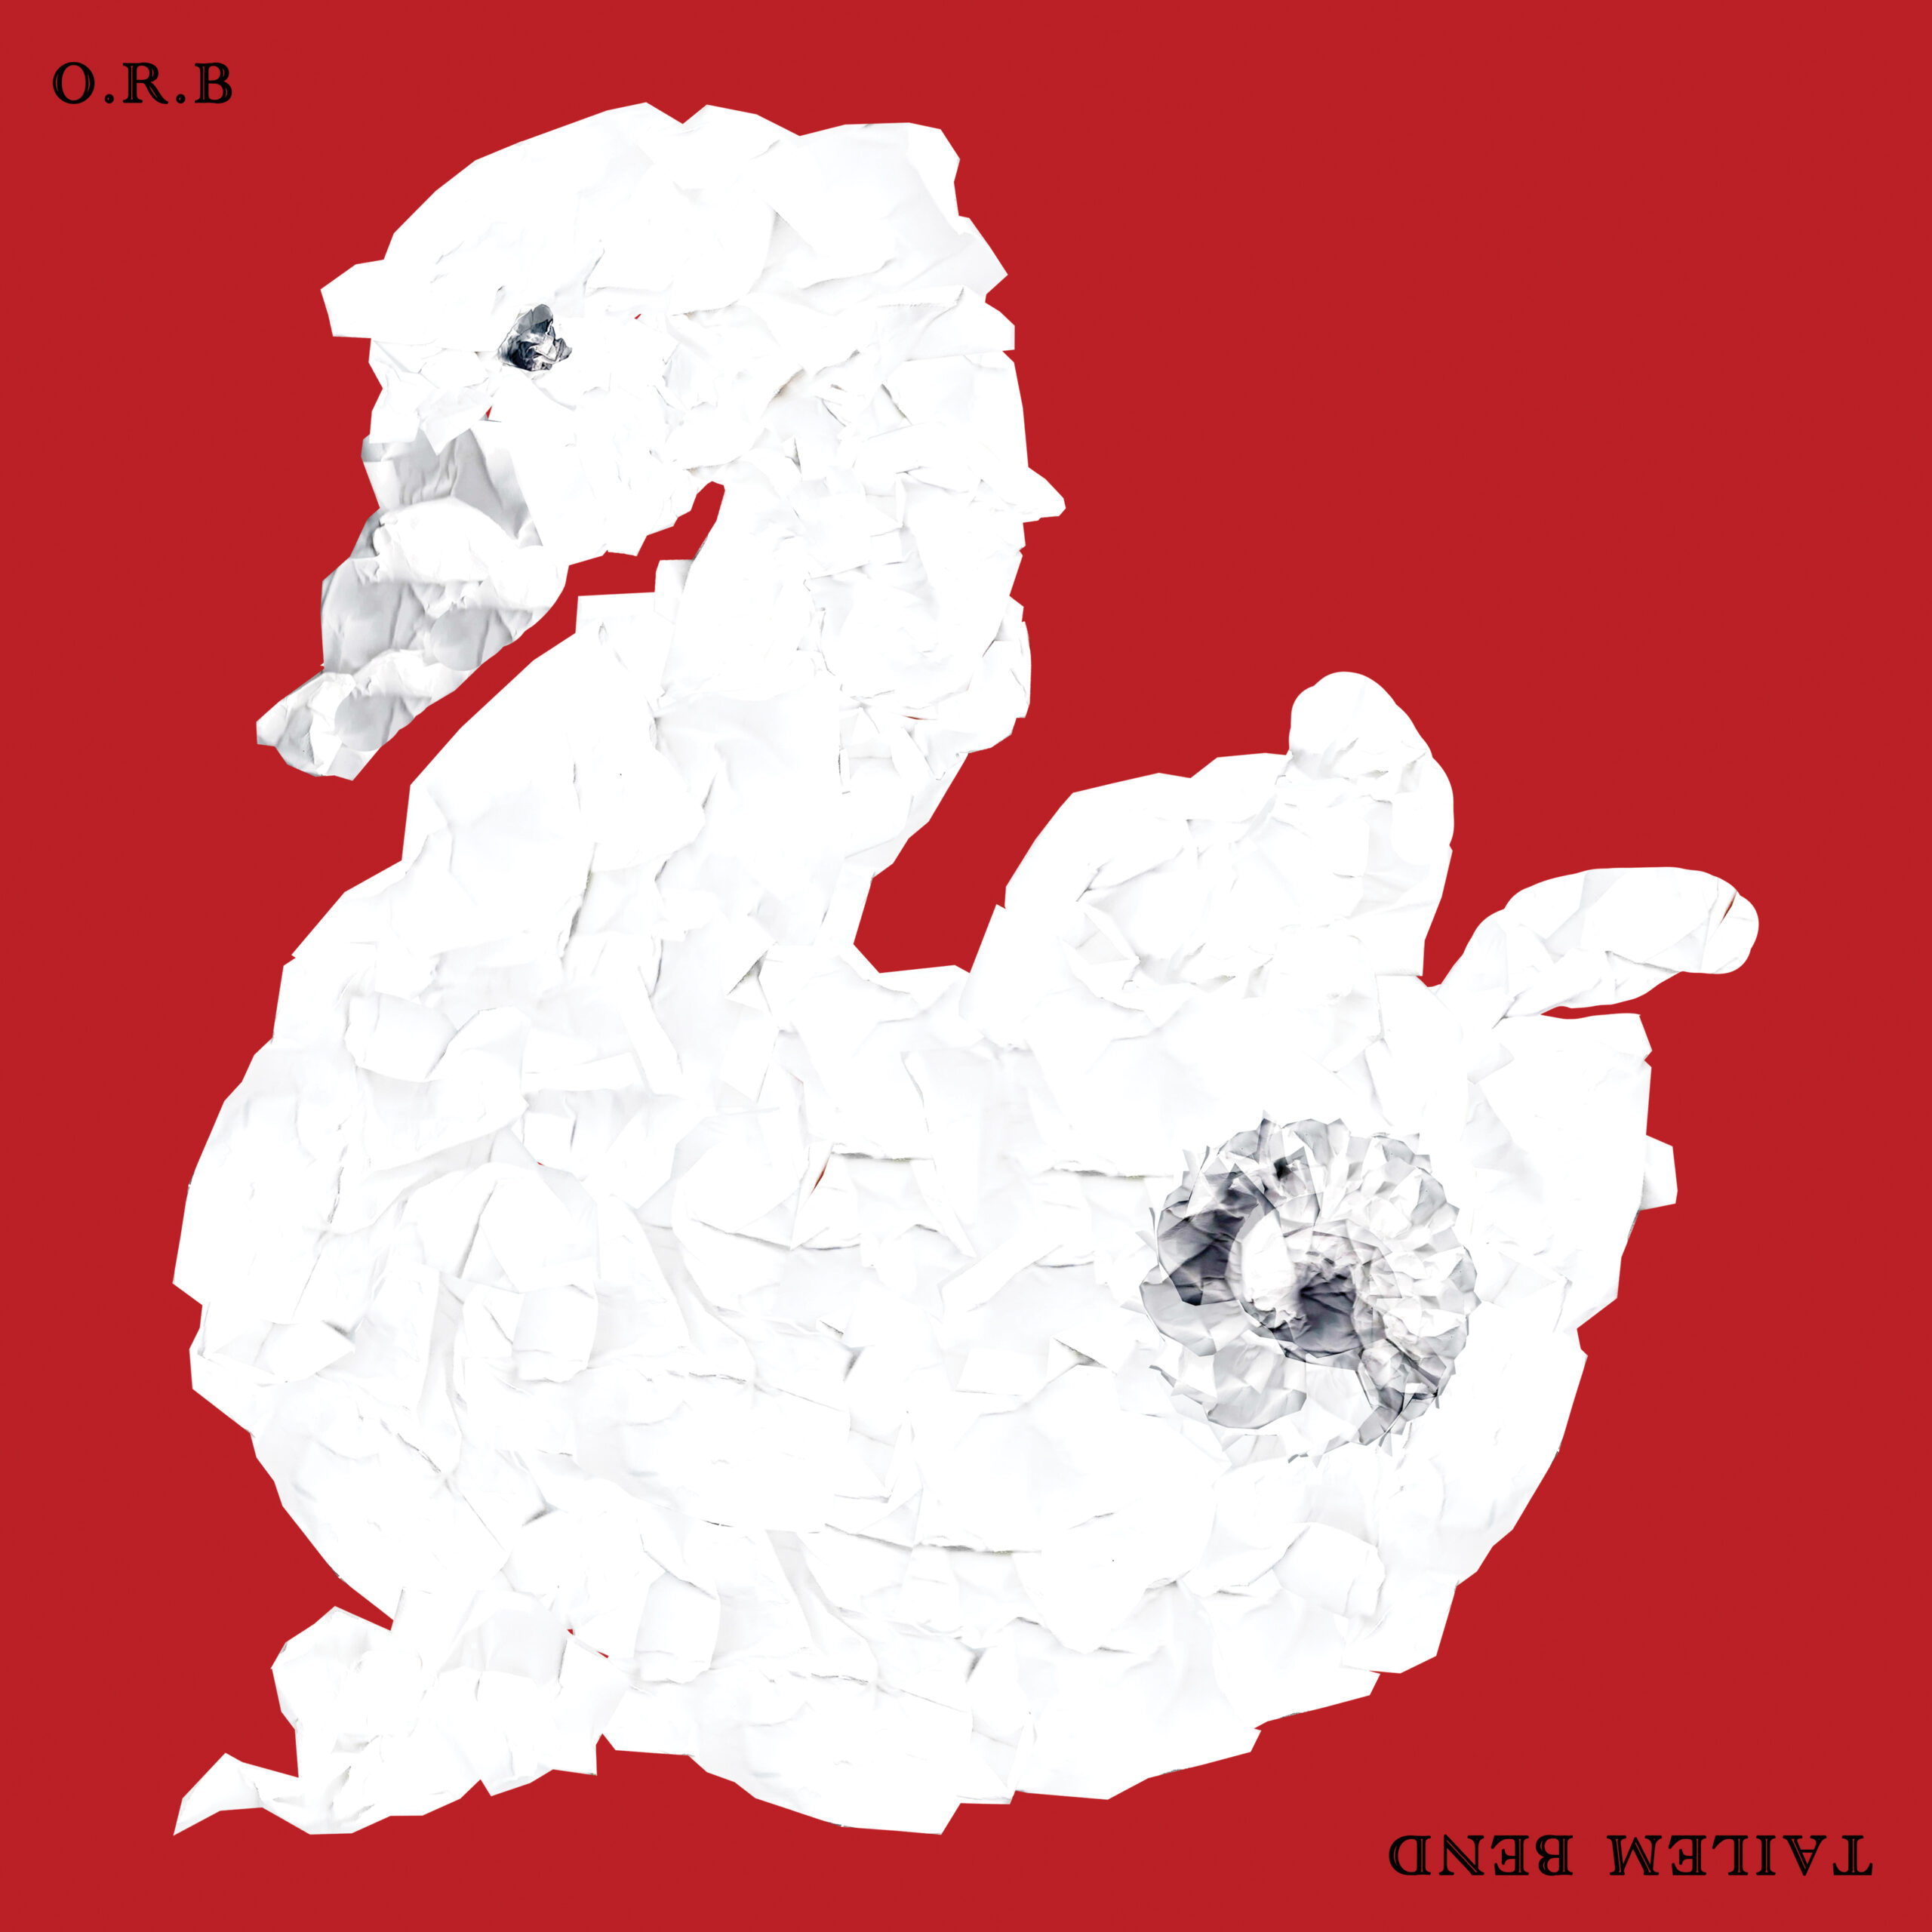 Aussie heavy psych band ORB announces new LP on Fuzz Club, shares two blistering new songs